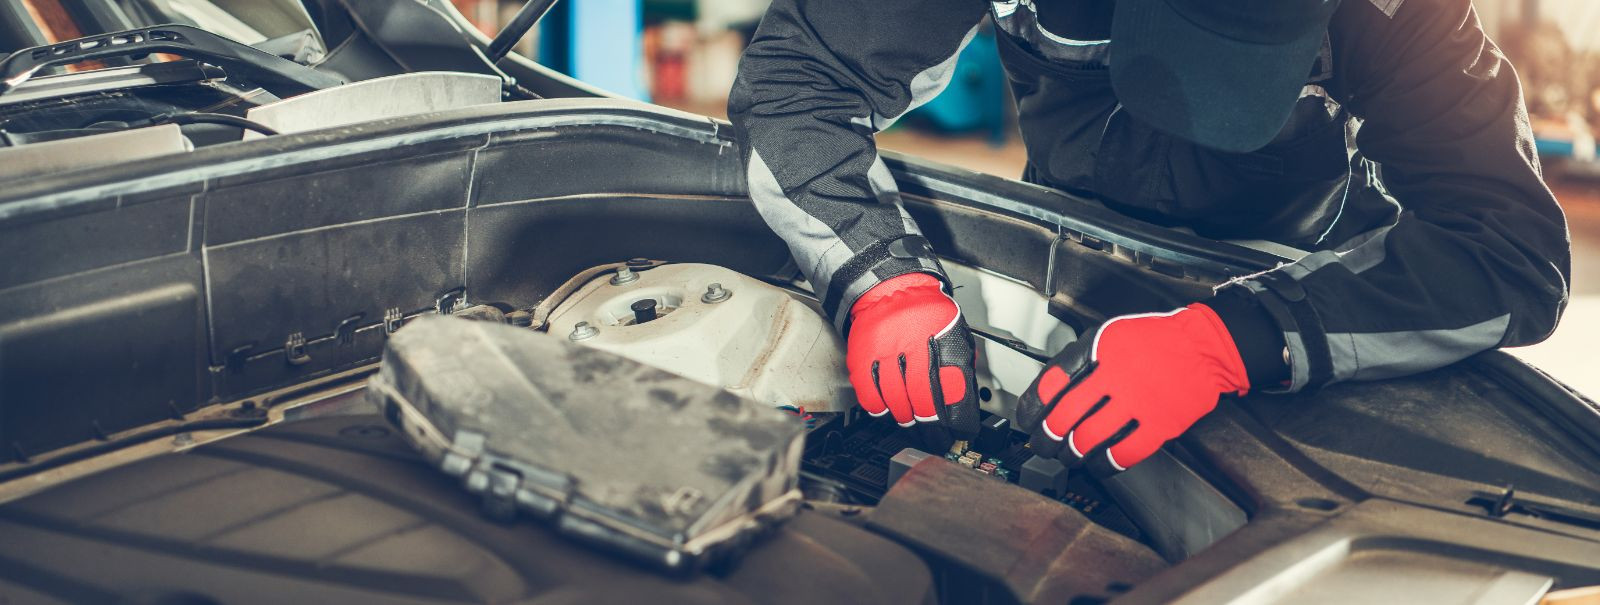 For vehicle owners and businesses with fleets, the health of your engine is paramount. Regular engine diagnostics are a critical aspect of vehicle maintenance t